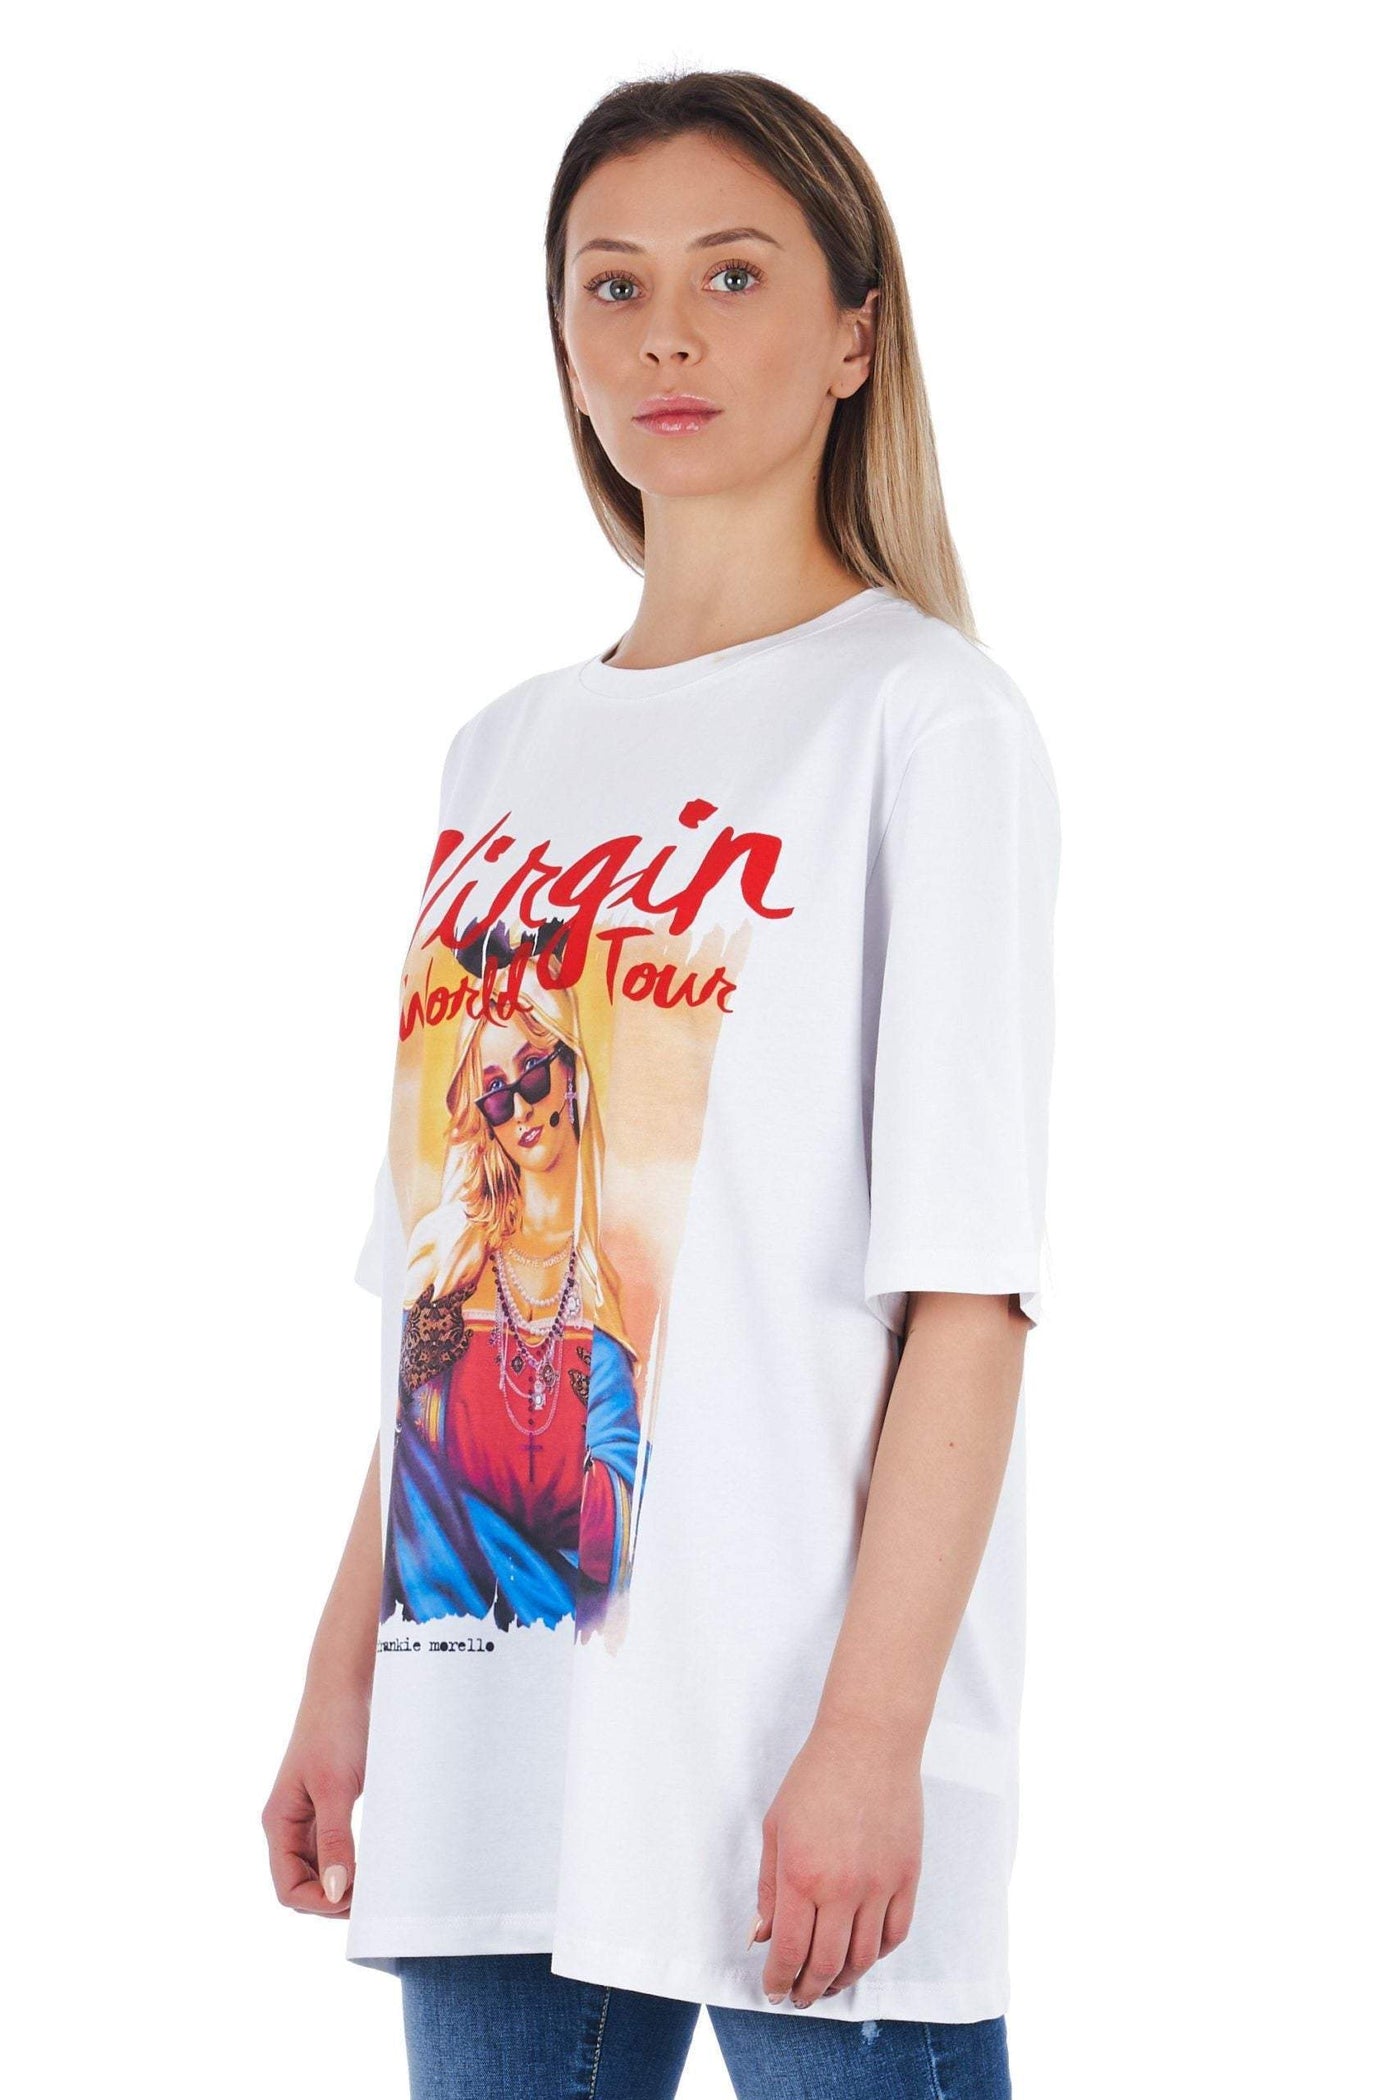 Frankie Morello  oversized Tops & T-Shirt #women, feed-agegroup-adult, feed-color-White, feed-gender-female, Frankie Morello, M, S, Tops & T-Shirts - Women - Clothing, White, XS, XXS at SEYMAYKA